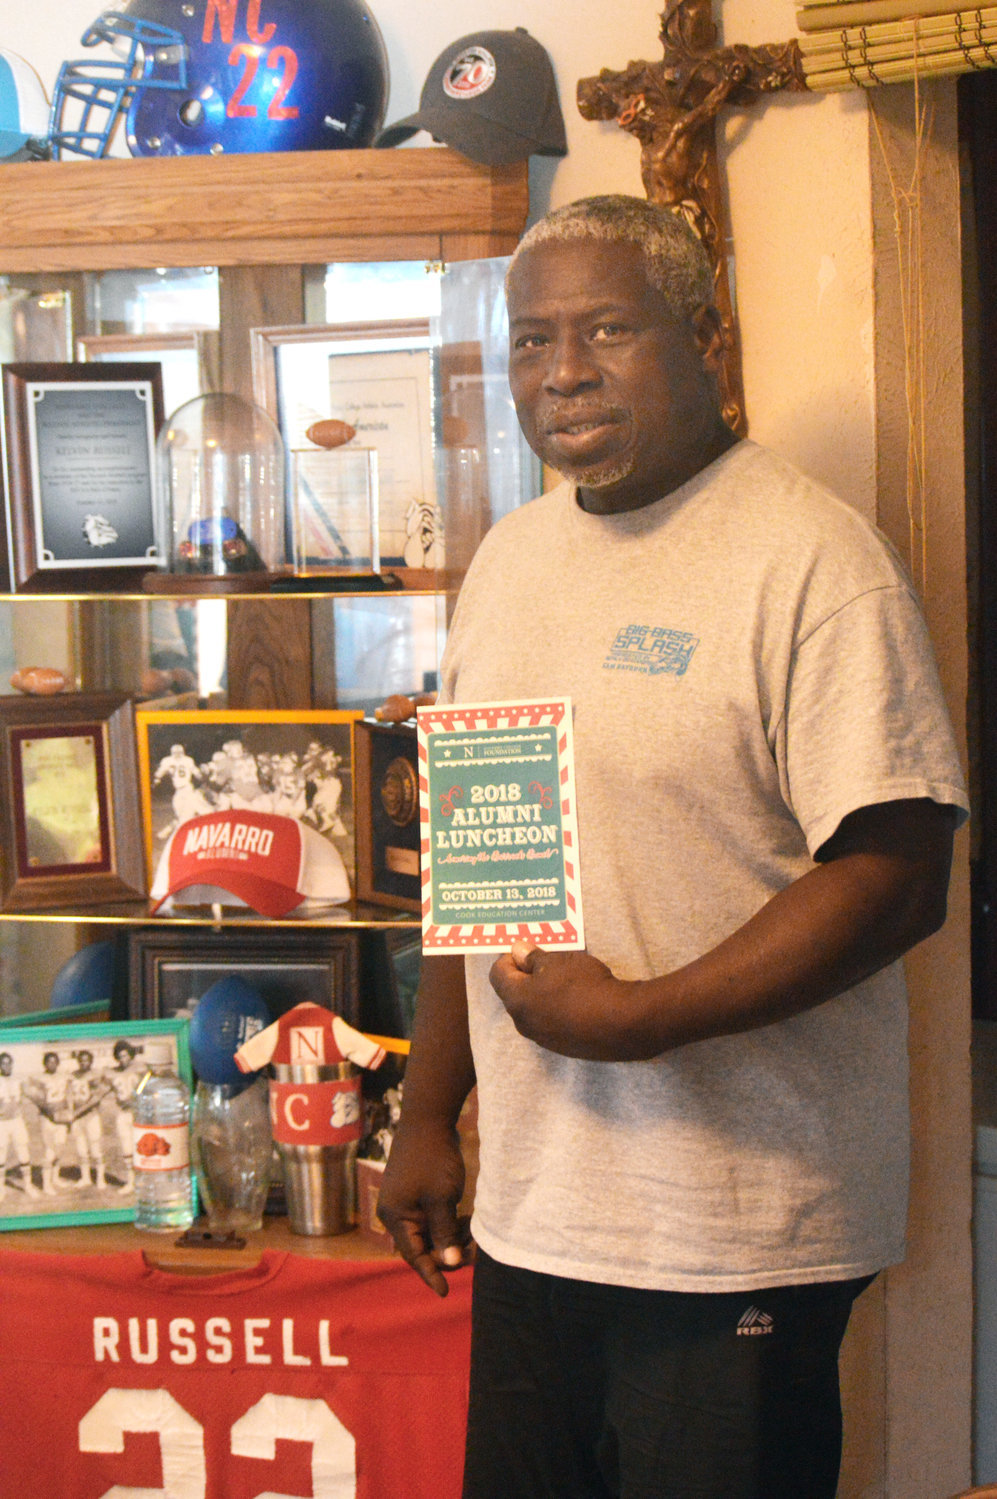 Kelvin Russell  is shown in his home with memorabilia he has collected from his football endeavors in high school and college. (Monitor photo by Larry Tucker)